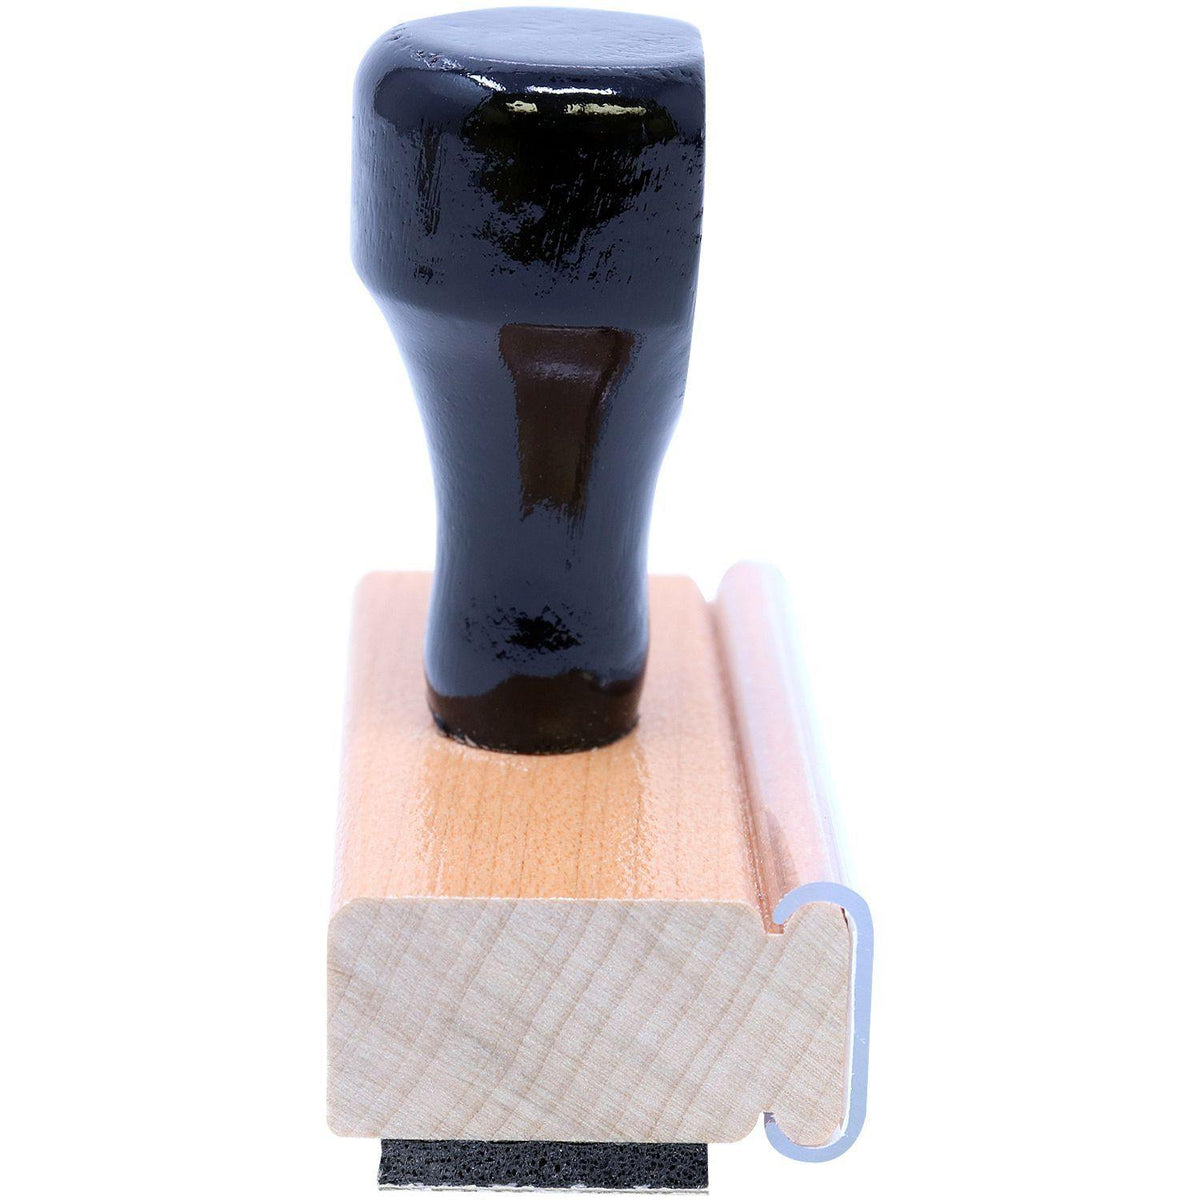 Outline Completed Rubber Stamp - Engineer Seal Stamps - Brand_Acorn, Impression Size_Small, Stamp Type_Regular Stamp, Type of Use_Business, Type of Use_Office